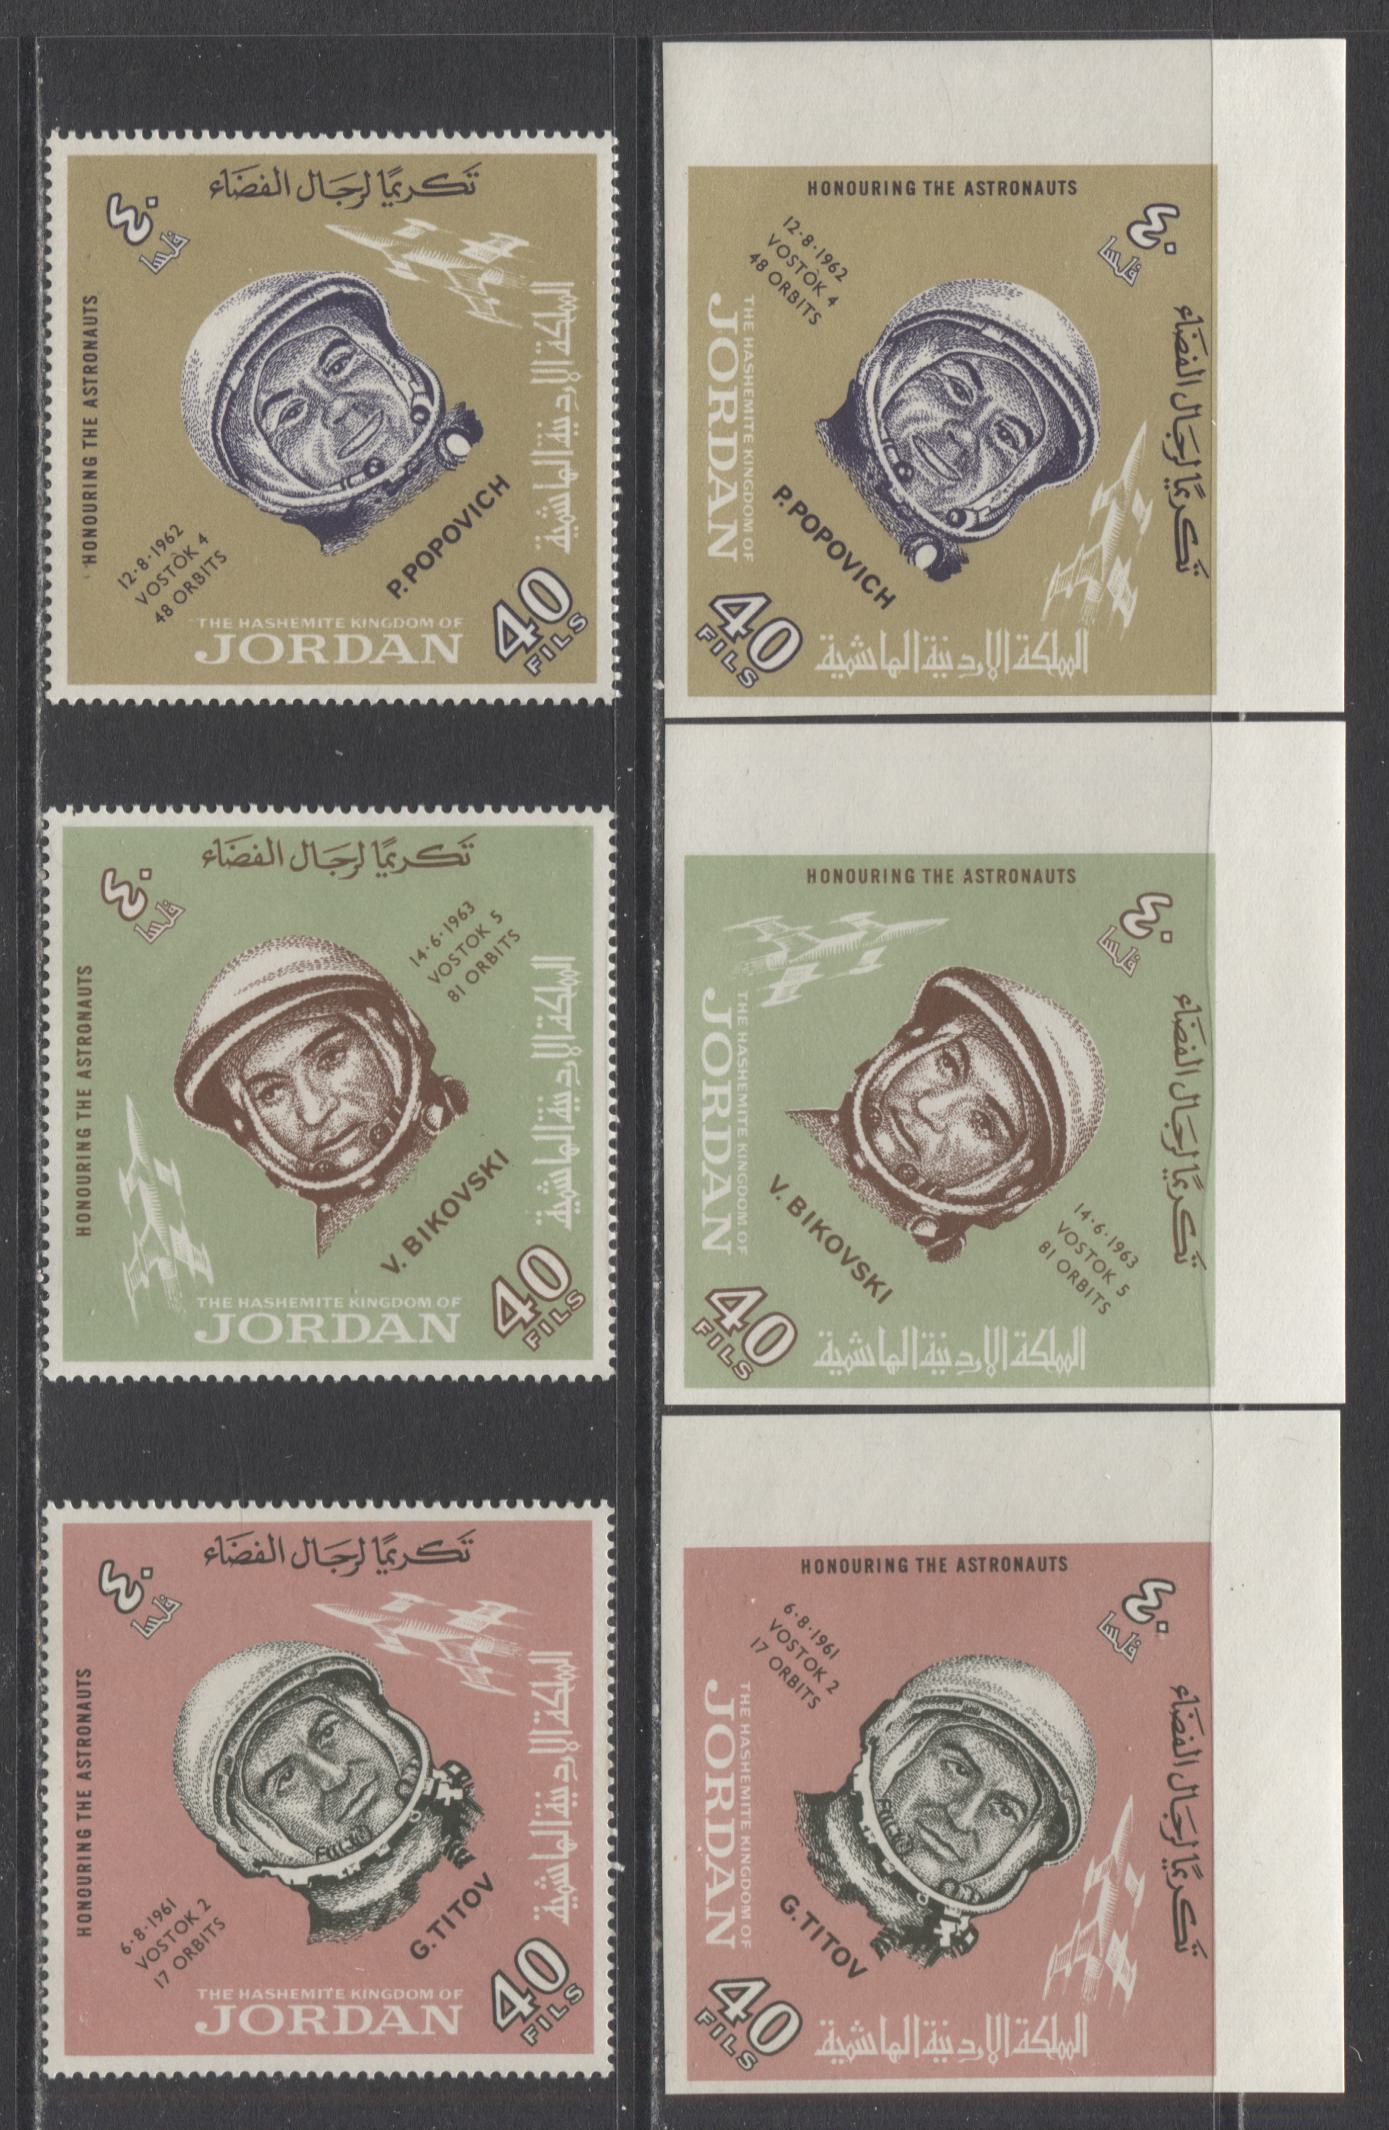 Lot 327 Jordan SC#491-496 1965 Honoring The Astronauts Issue, A VFNH/LH Range Of Perf & Imperf Singles, 2017 Scott Cat. $13.75 USD, Click on Listing to See ALL Pictures